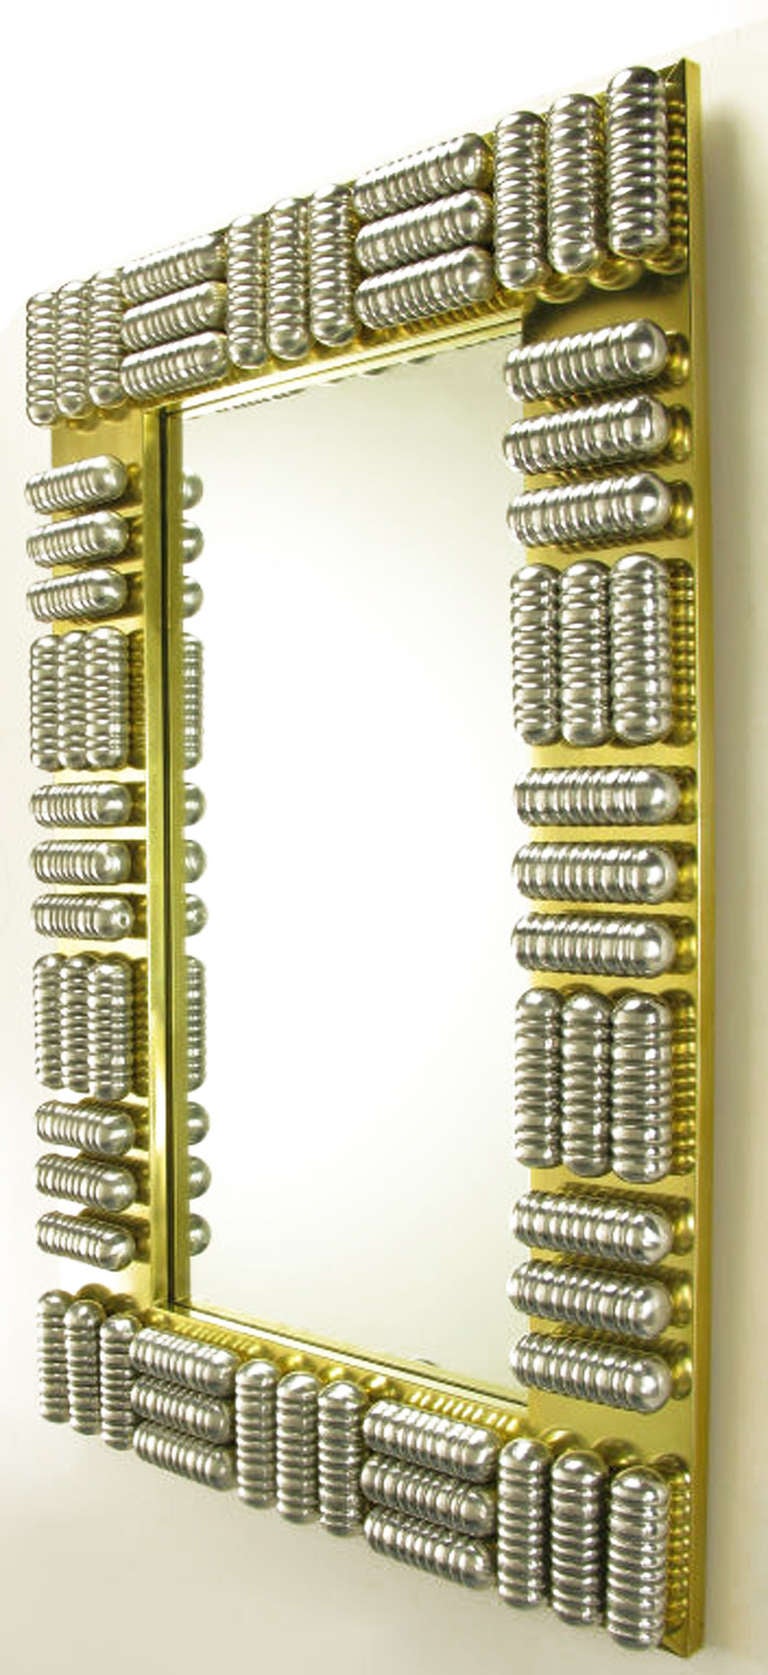 Custom-made wall mirror with brass wrapped wood frame and a series of polished and ribbed aluminum enclosed tubes. Each tube is wired to through the frame in two places. The mirrored glass is recessed into the frame three-quarters of an inch.